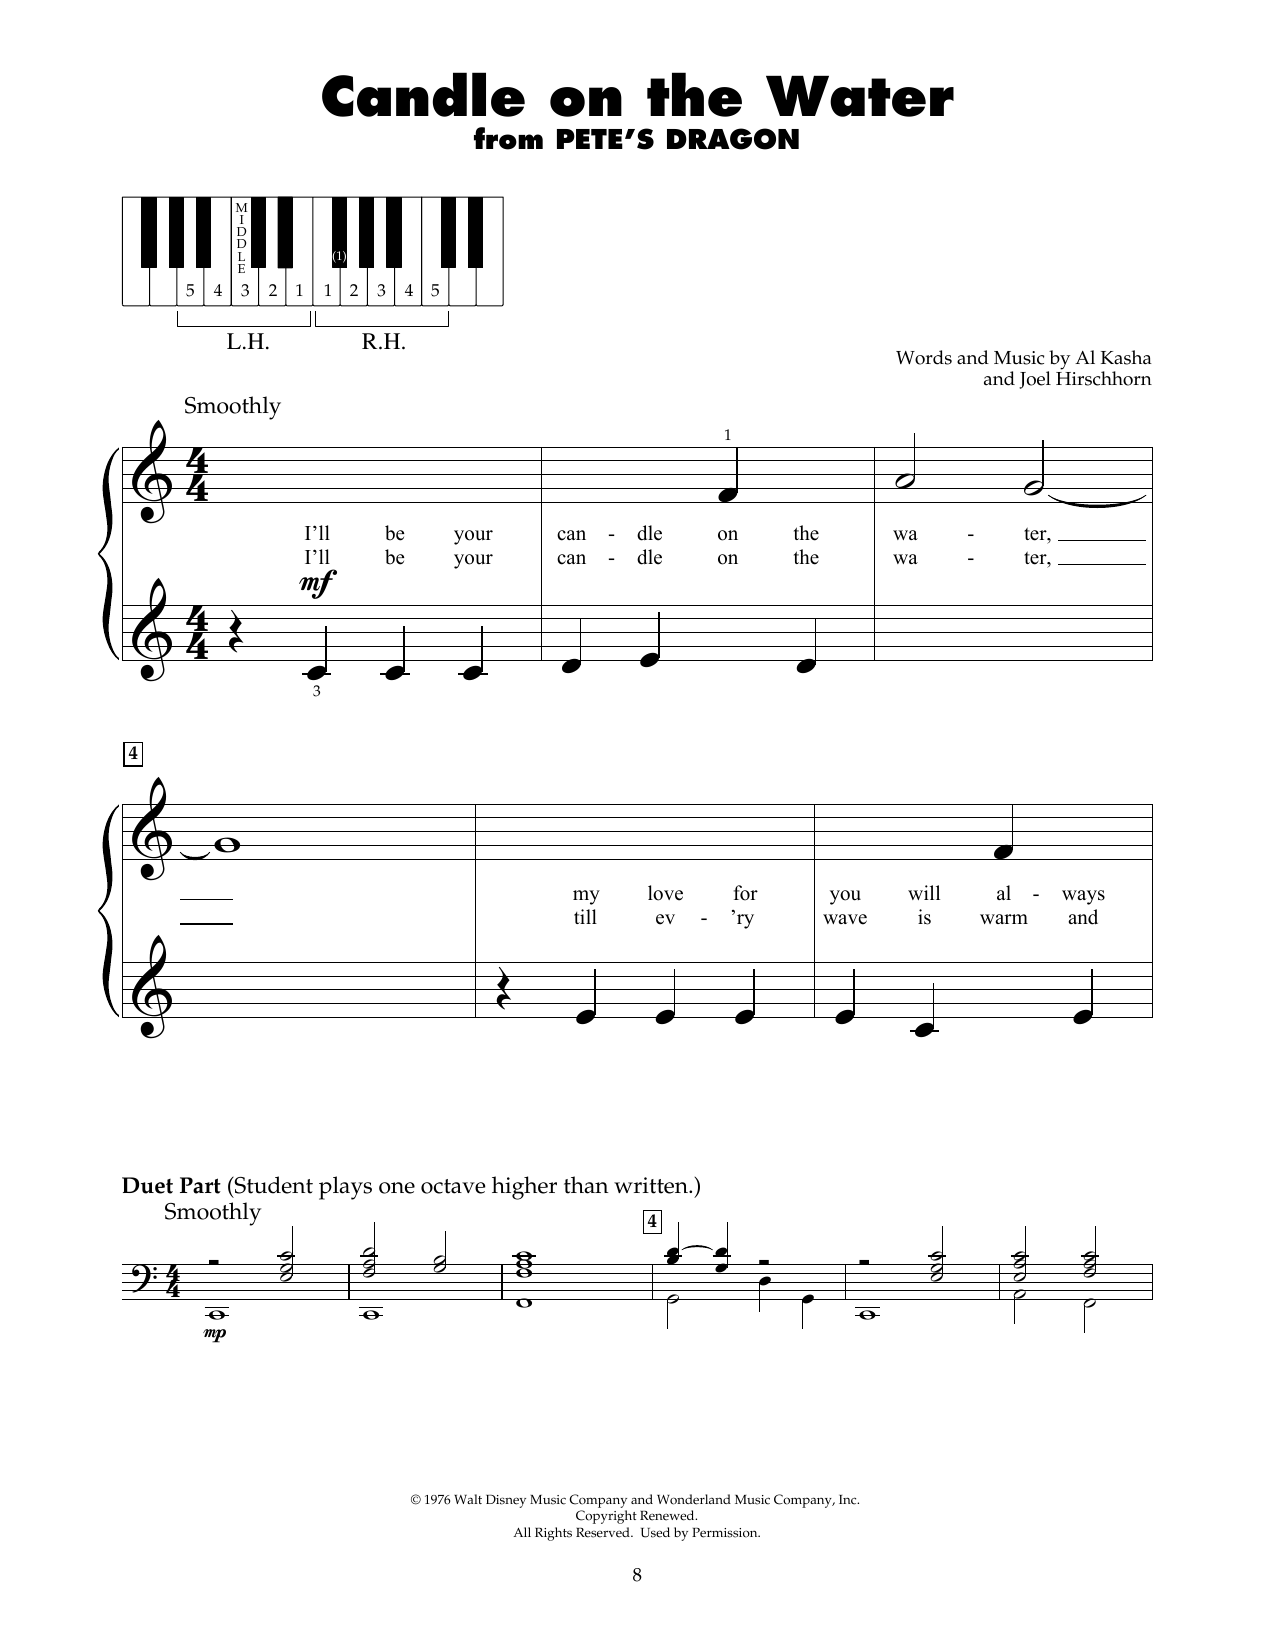 Download Al Kasha Candle On The Water (from Pete's Dragon Sheet Music